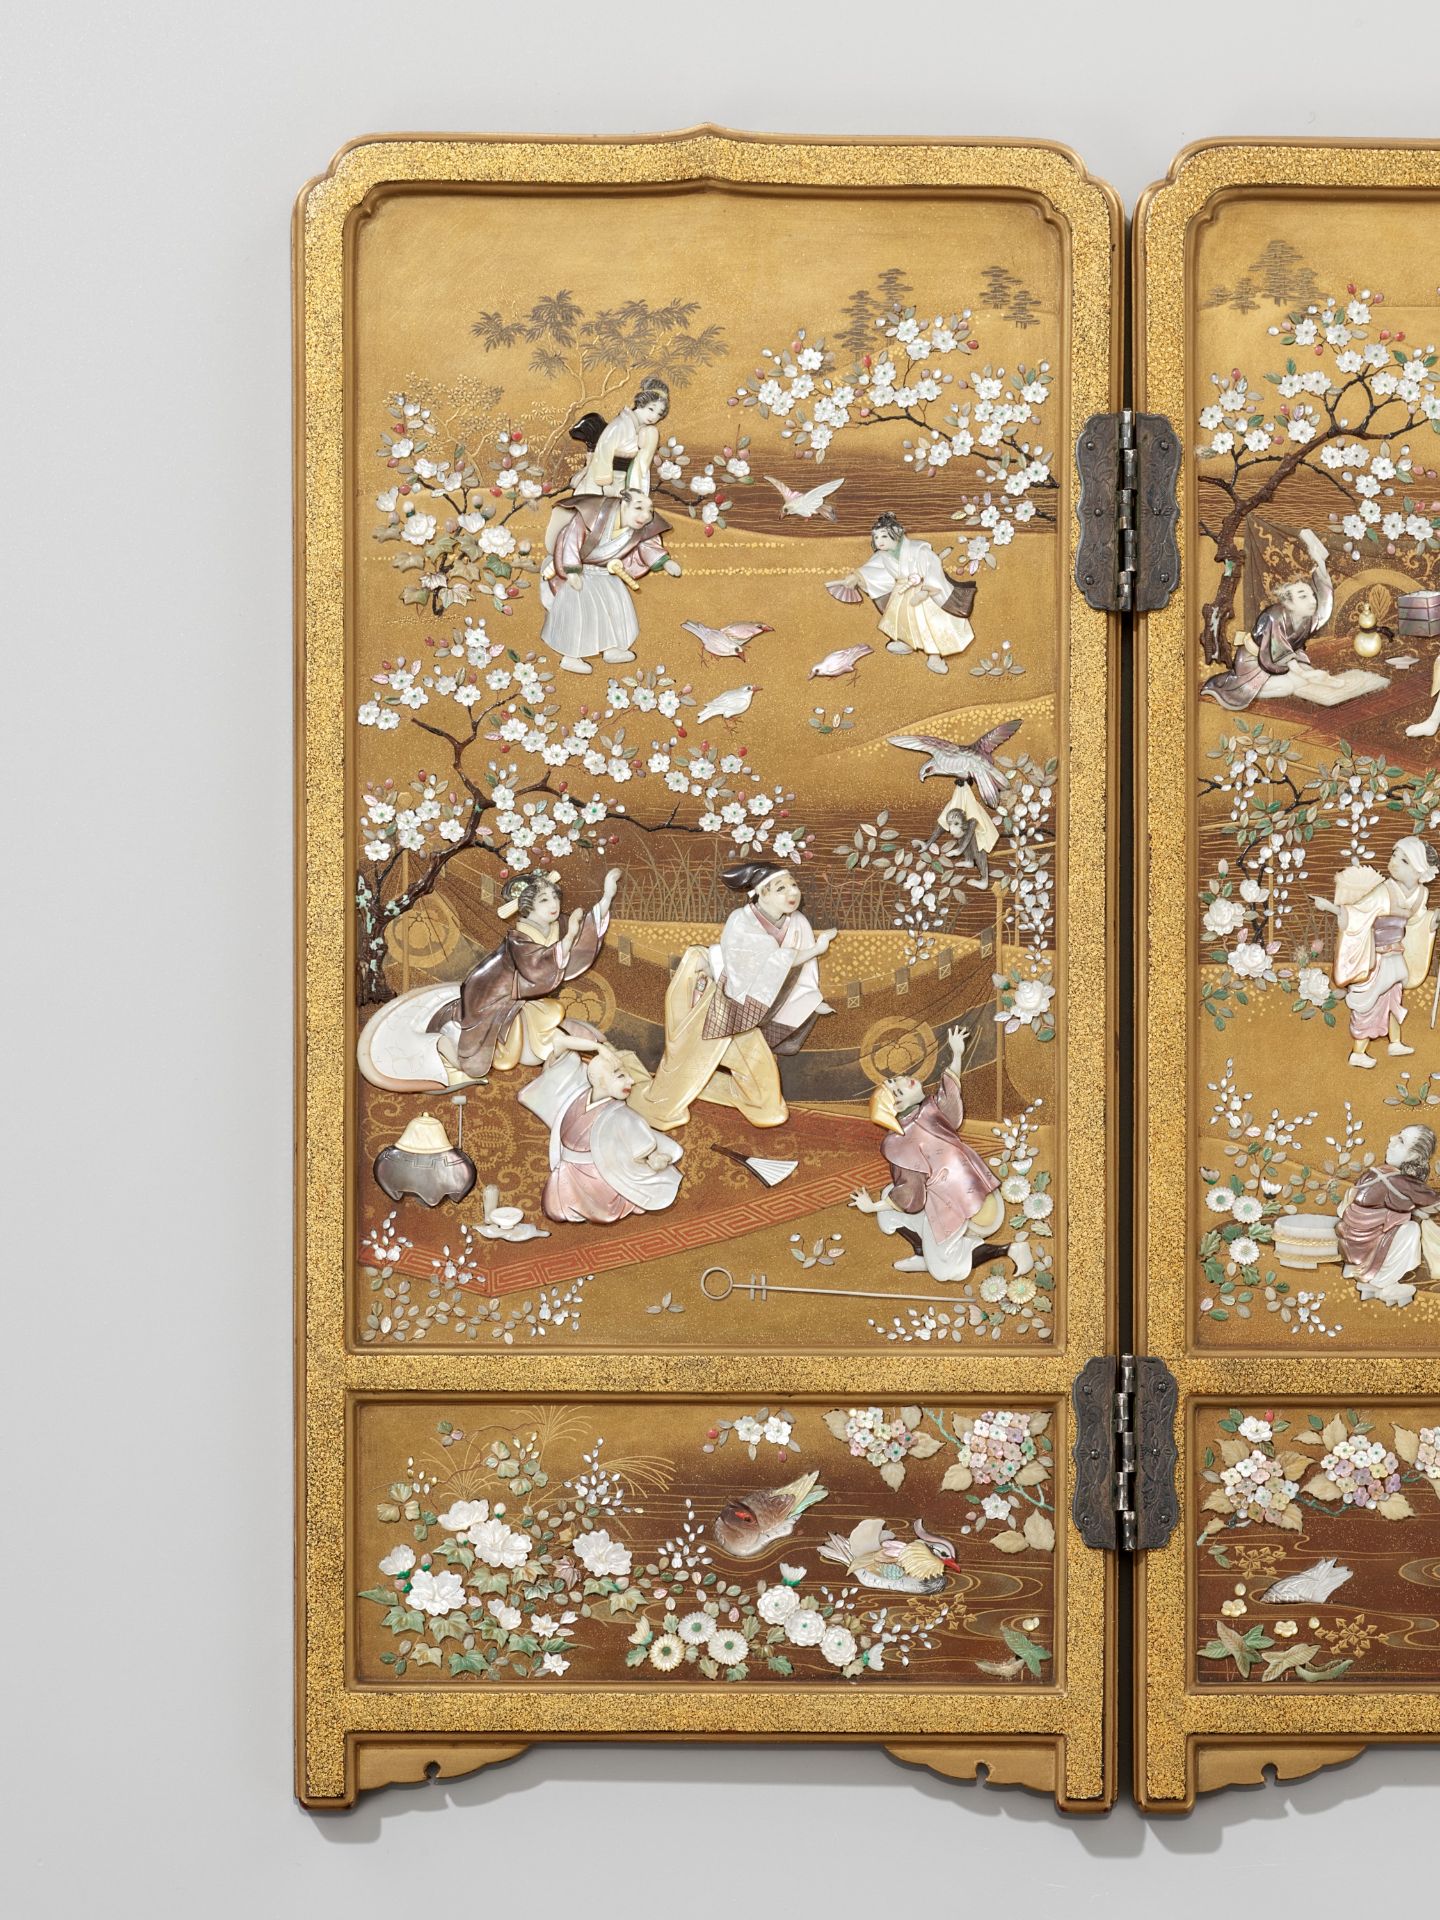 A RARE AND SUPERB SHIBAYAMA-STYLE INLAID GOLD LACQUER TABLE SCREEN WITH KYOSAI'S ANIMAL CIRCUS - Bild 10 aus 11